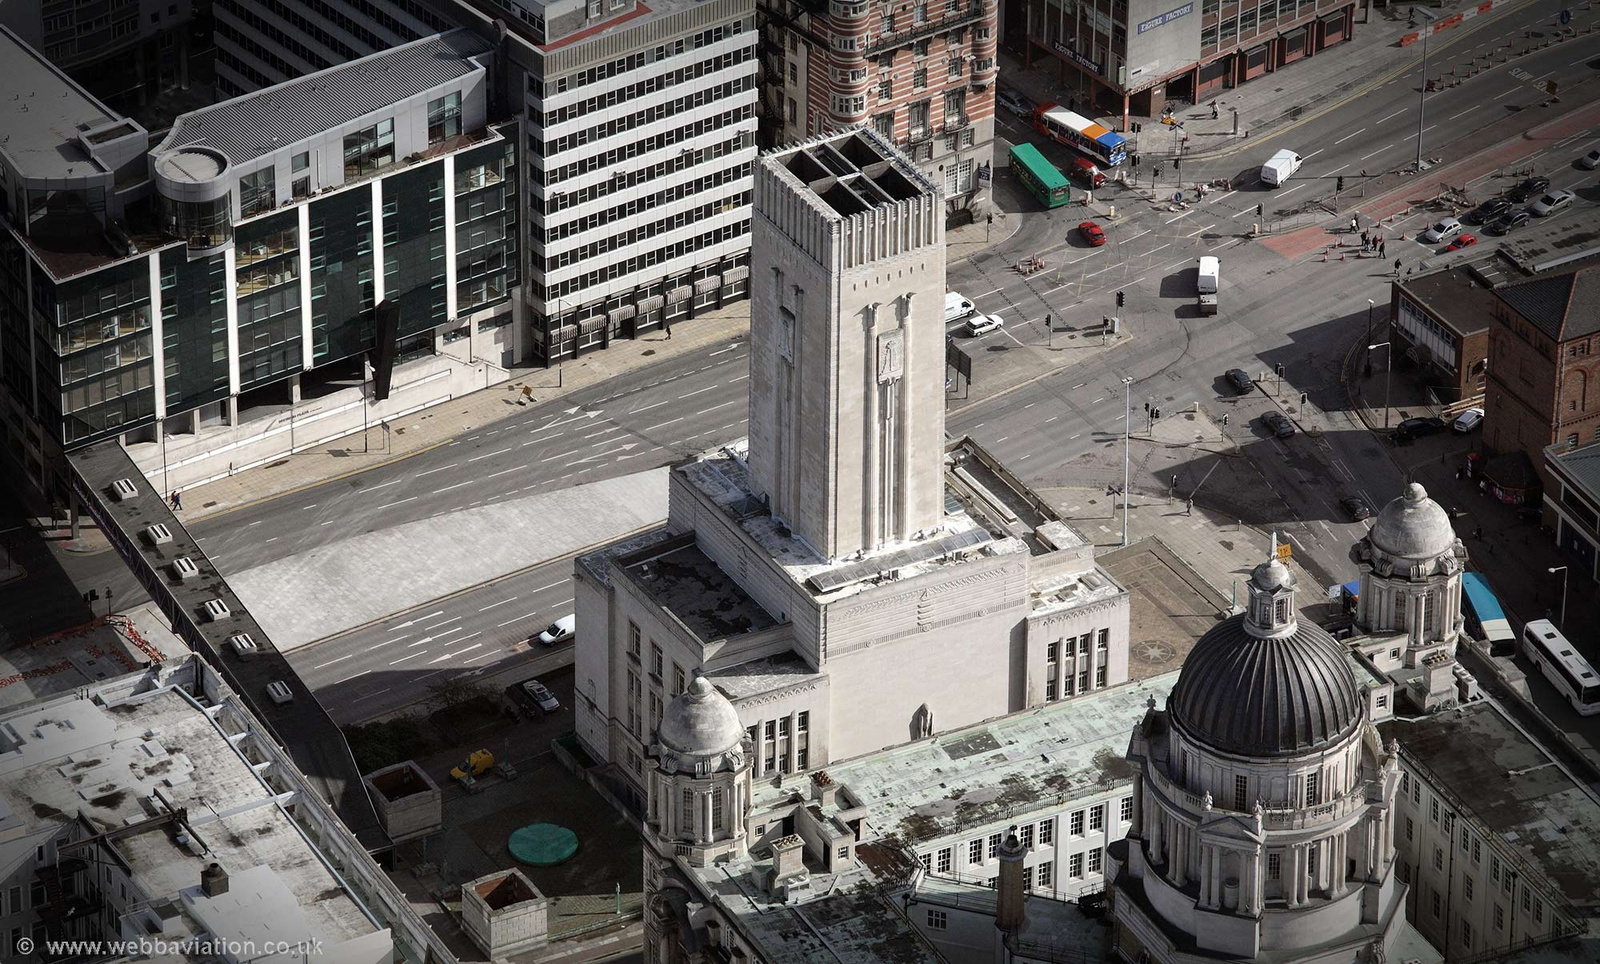 George's Dock Ventilation and Control Station, Pier Head  Liverpool  aerial photograph